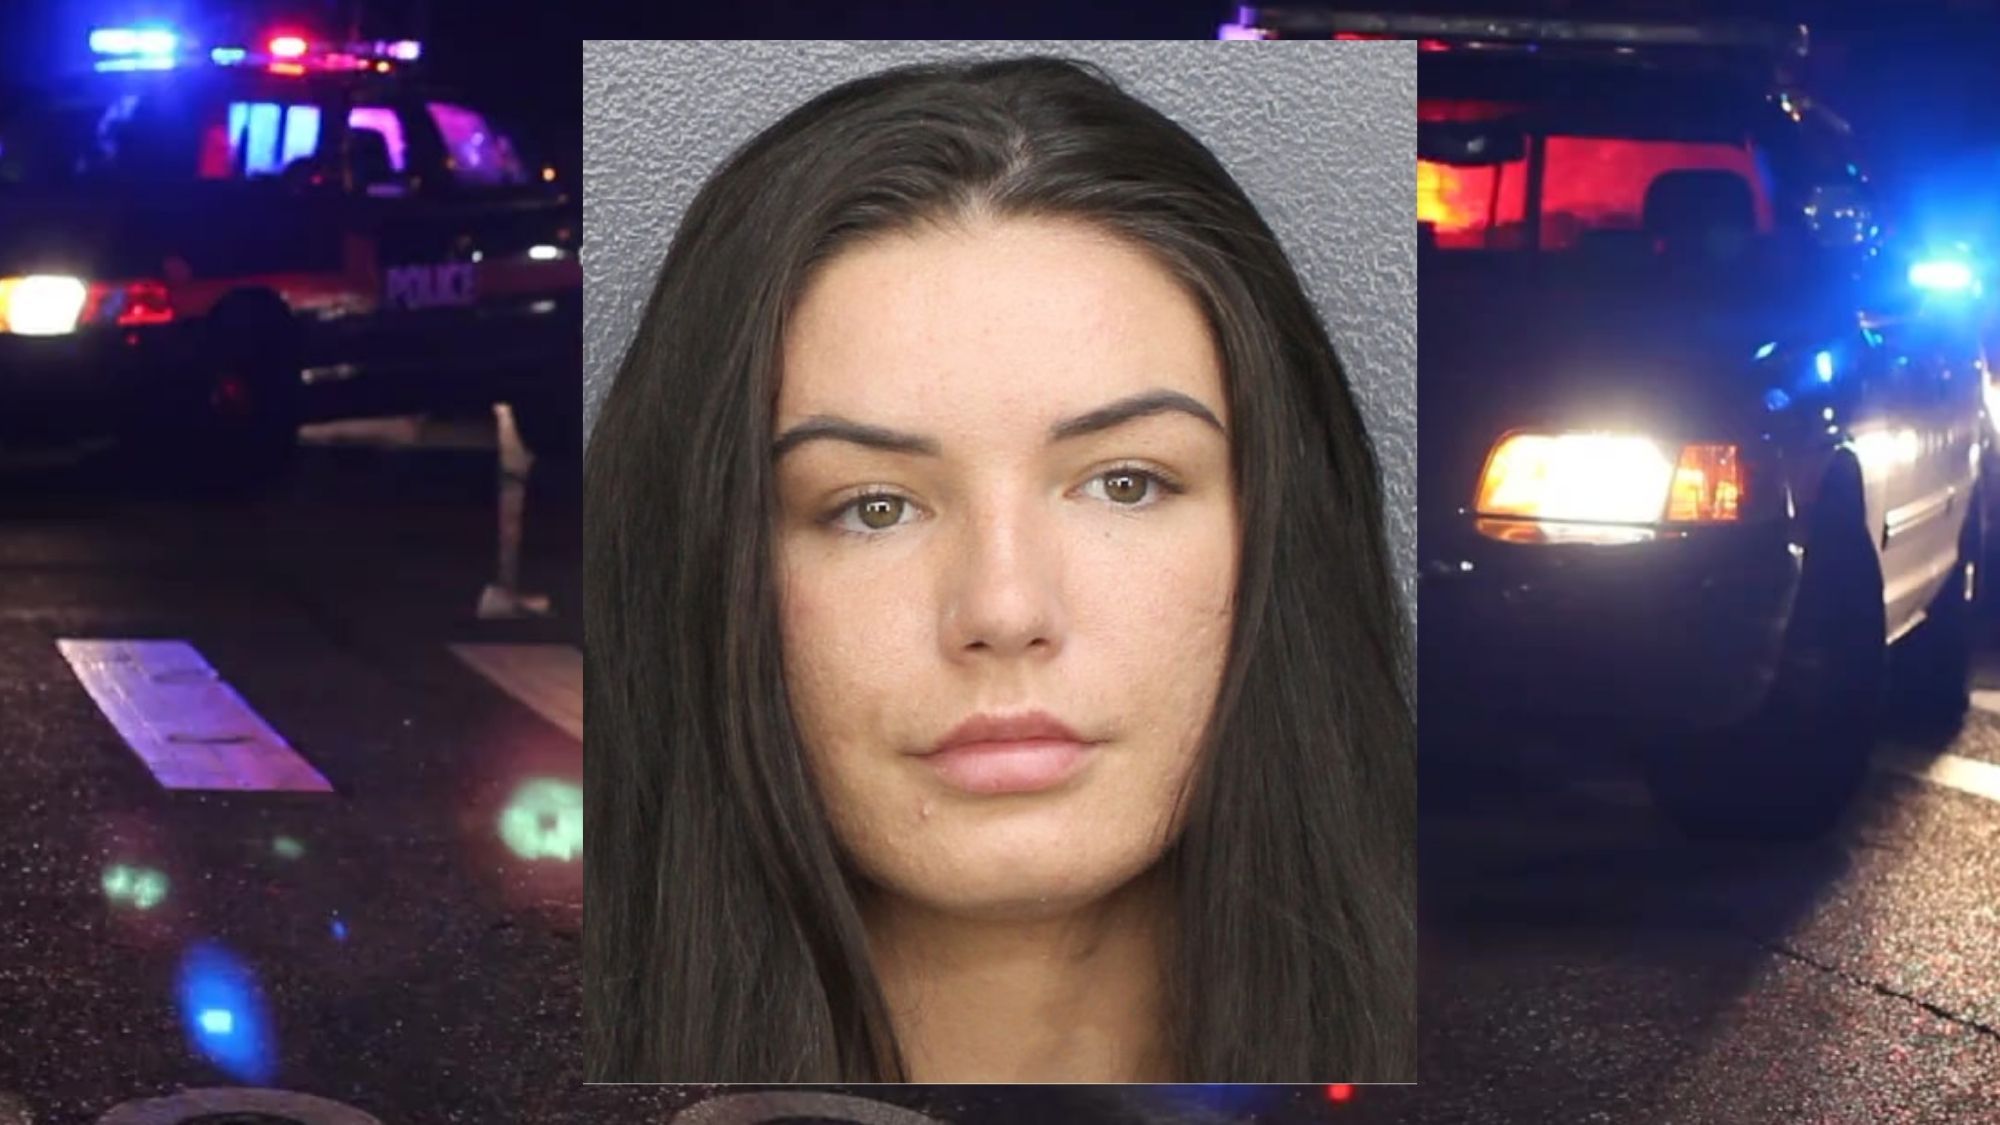 Fast and Foolish: Boca Raton Woman Arrested After High-Speed Chase from Coral Springs to Boca Raton